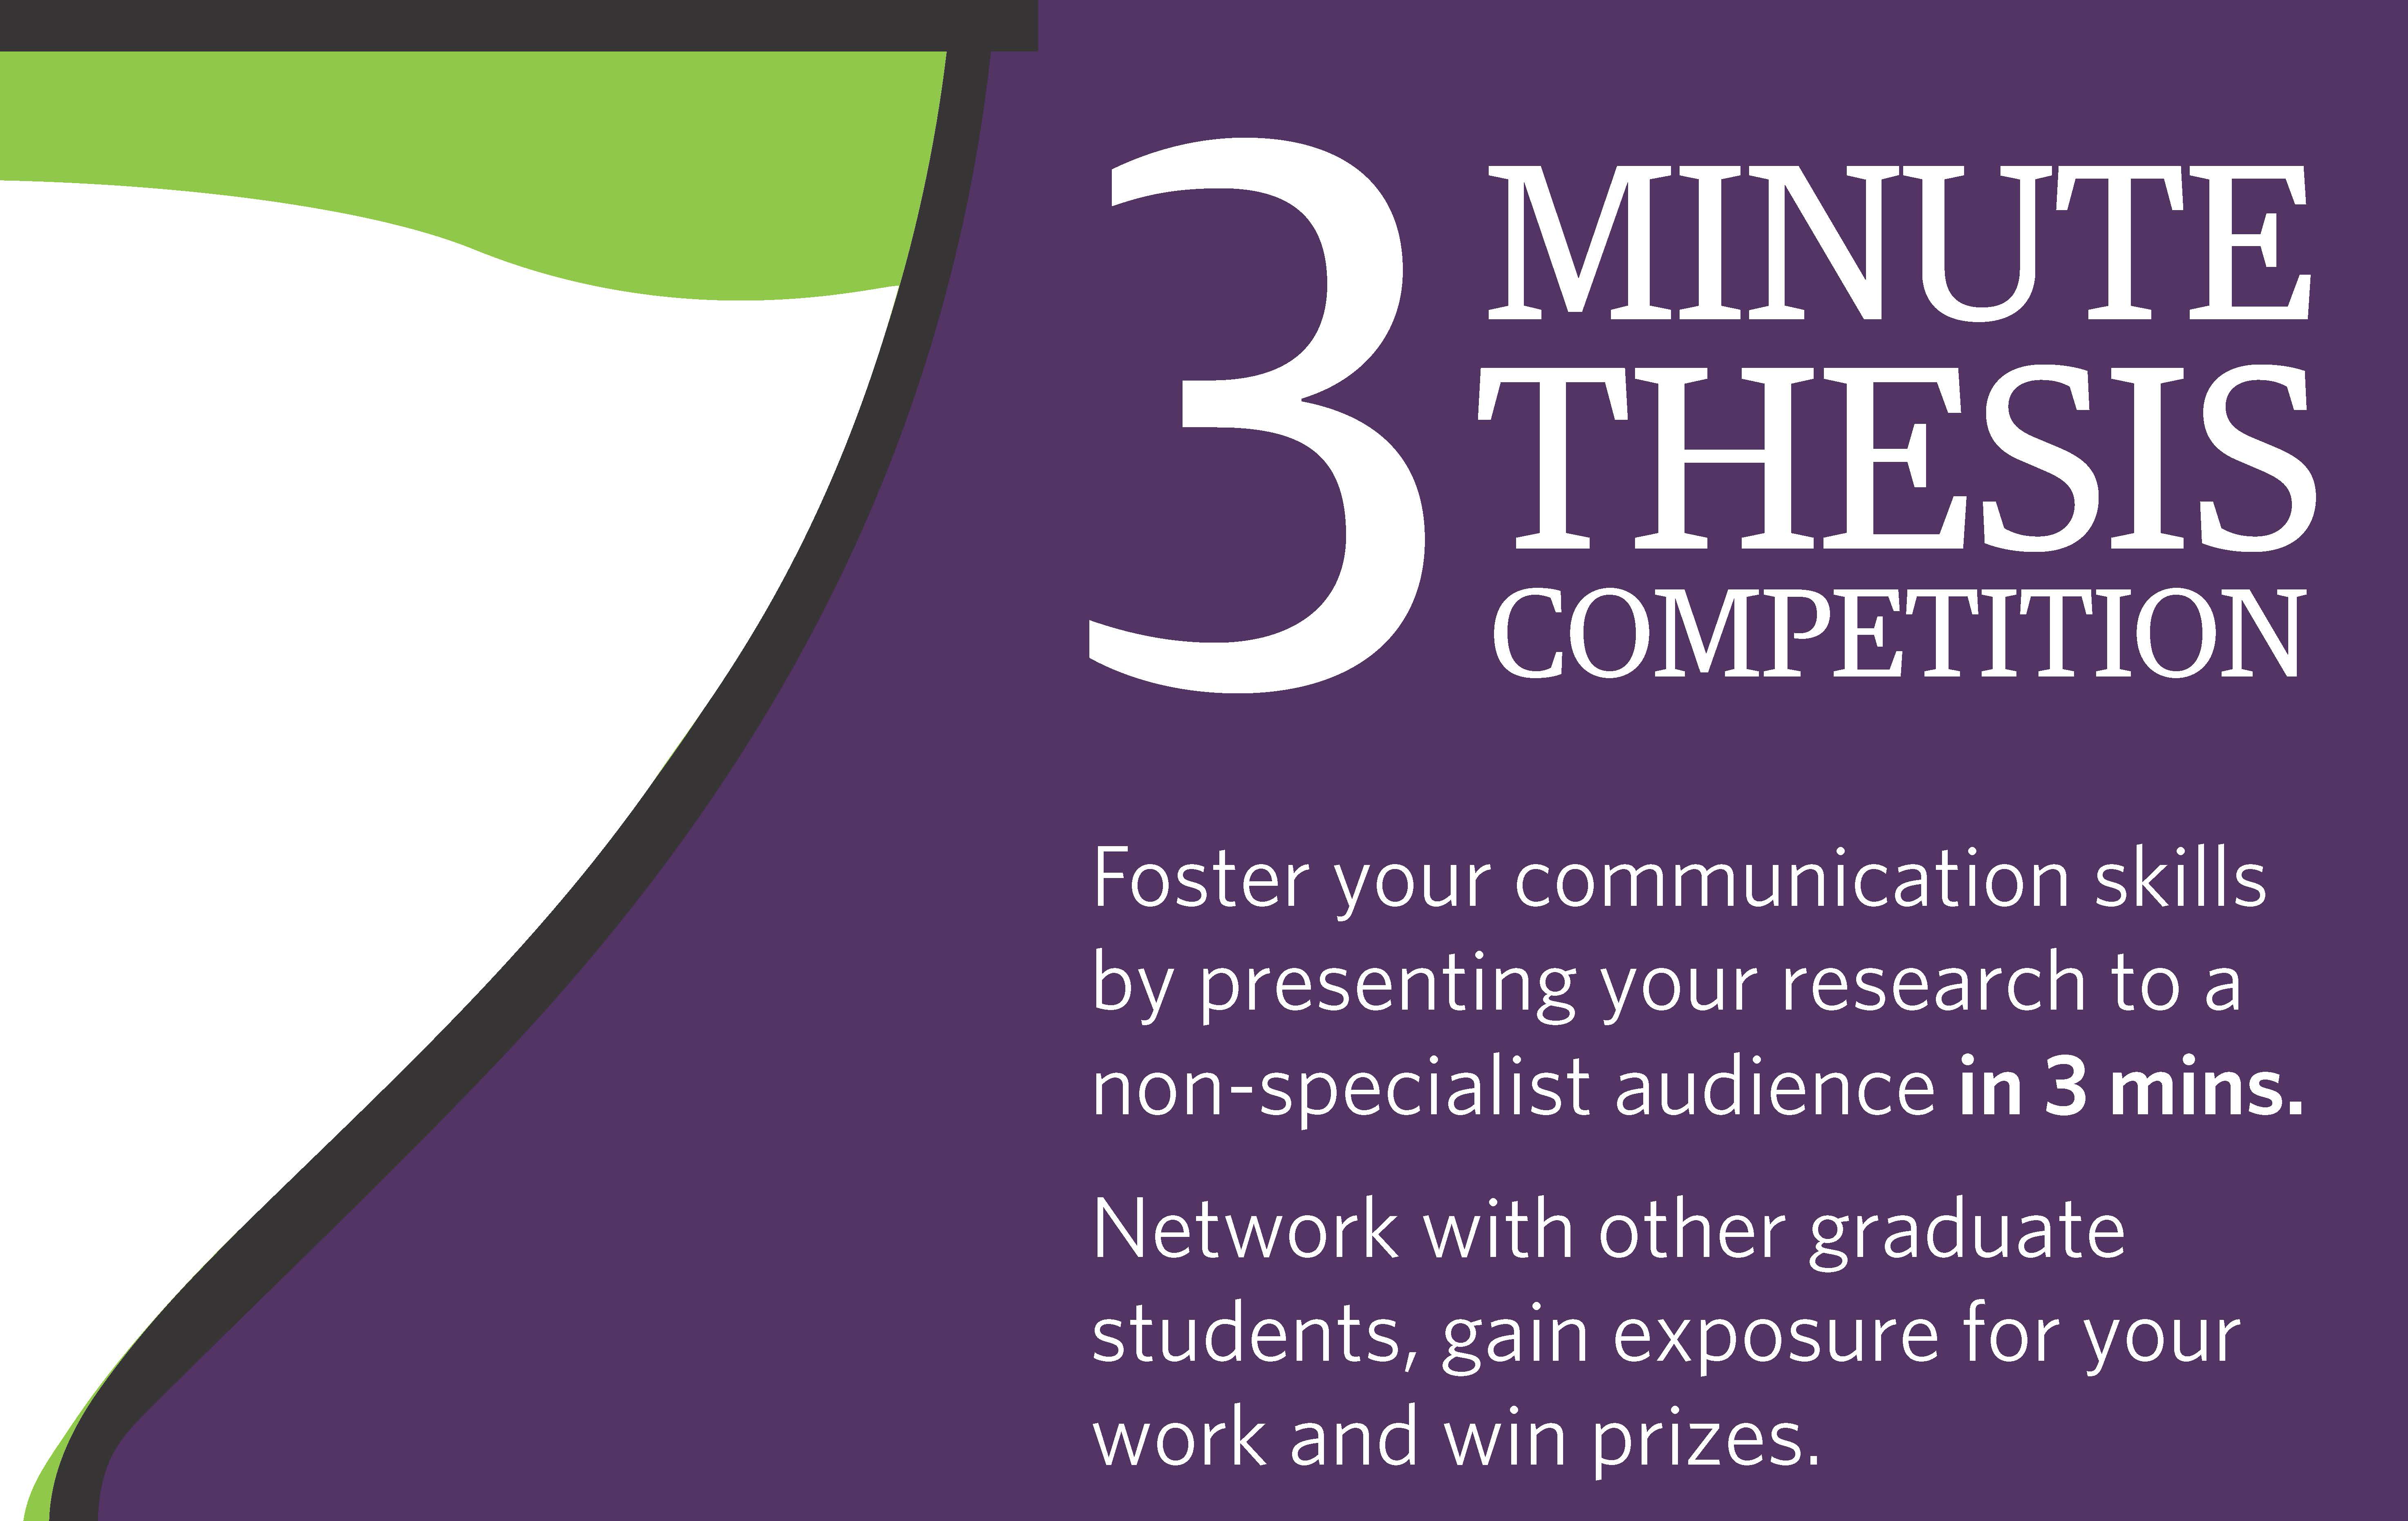 A section of the 3 minute thesis competition poster, with a purple background and a white and green shape on the left